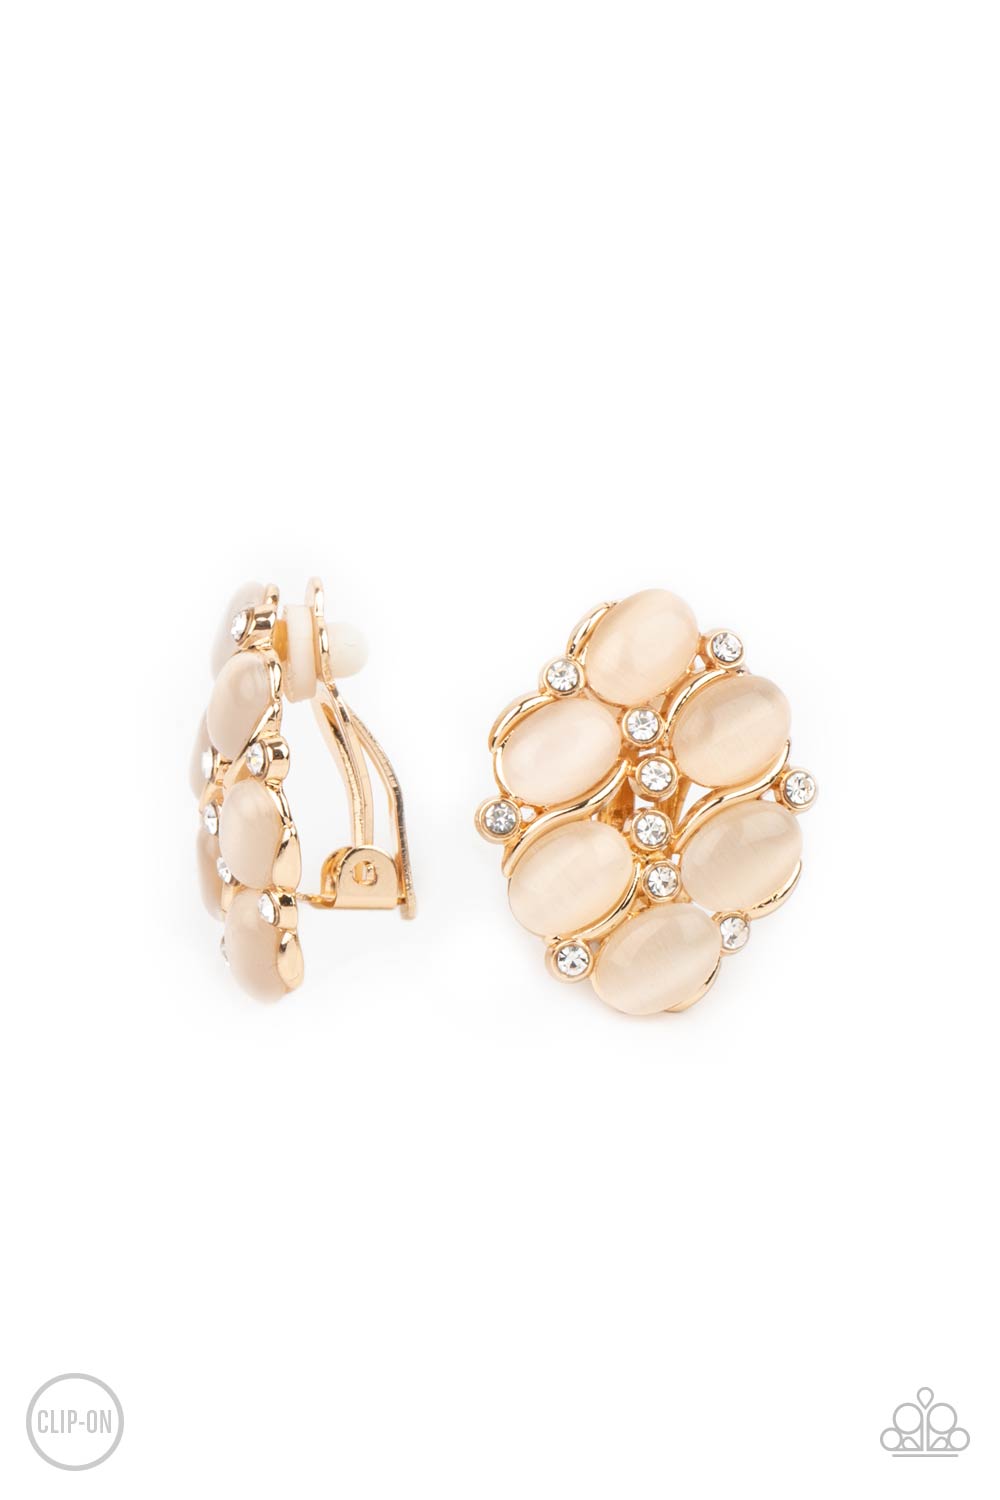 Row, Row, Row Your YACHT Gold Cat's Eye Stone Clip-On Earrings - Paparazzi Accessories- lightbox - CarasShop.com - $5 Jewelry by Cara Jewels